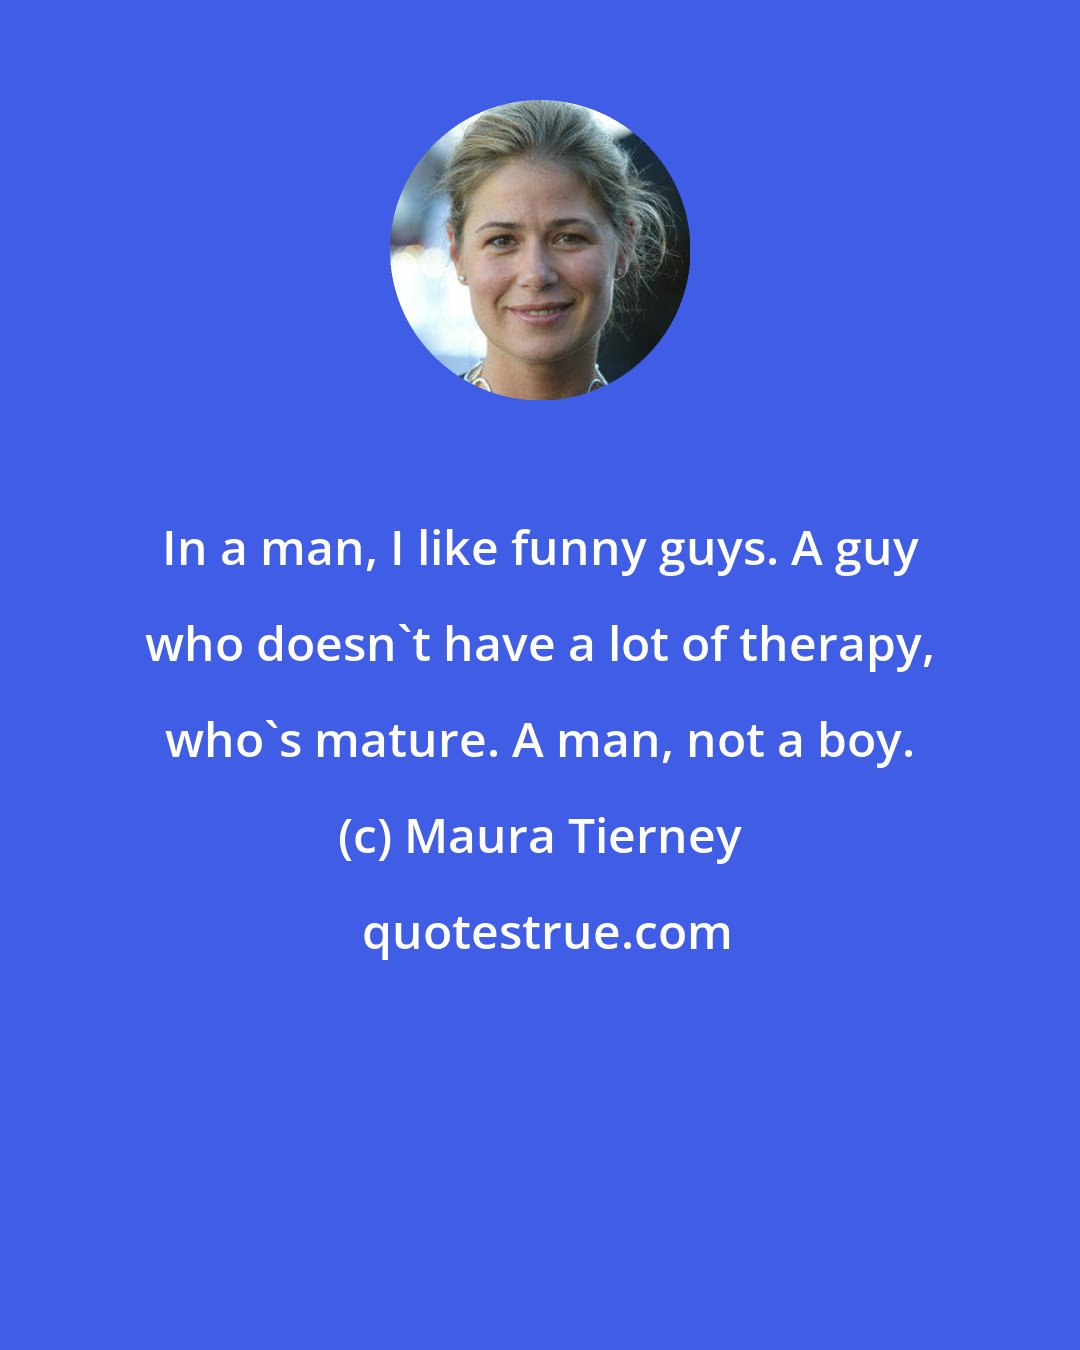 Maura Tierney: In a man, I like funny guys. A guy who doesn't have a lot of therapy, who's mature. A man, not a boy.